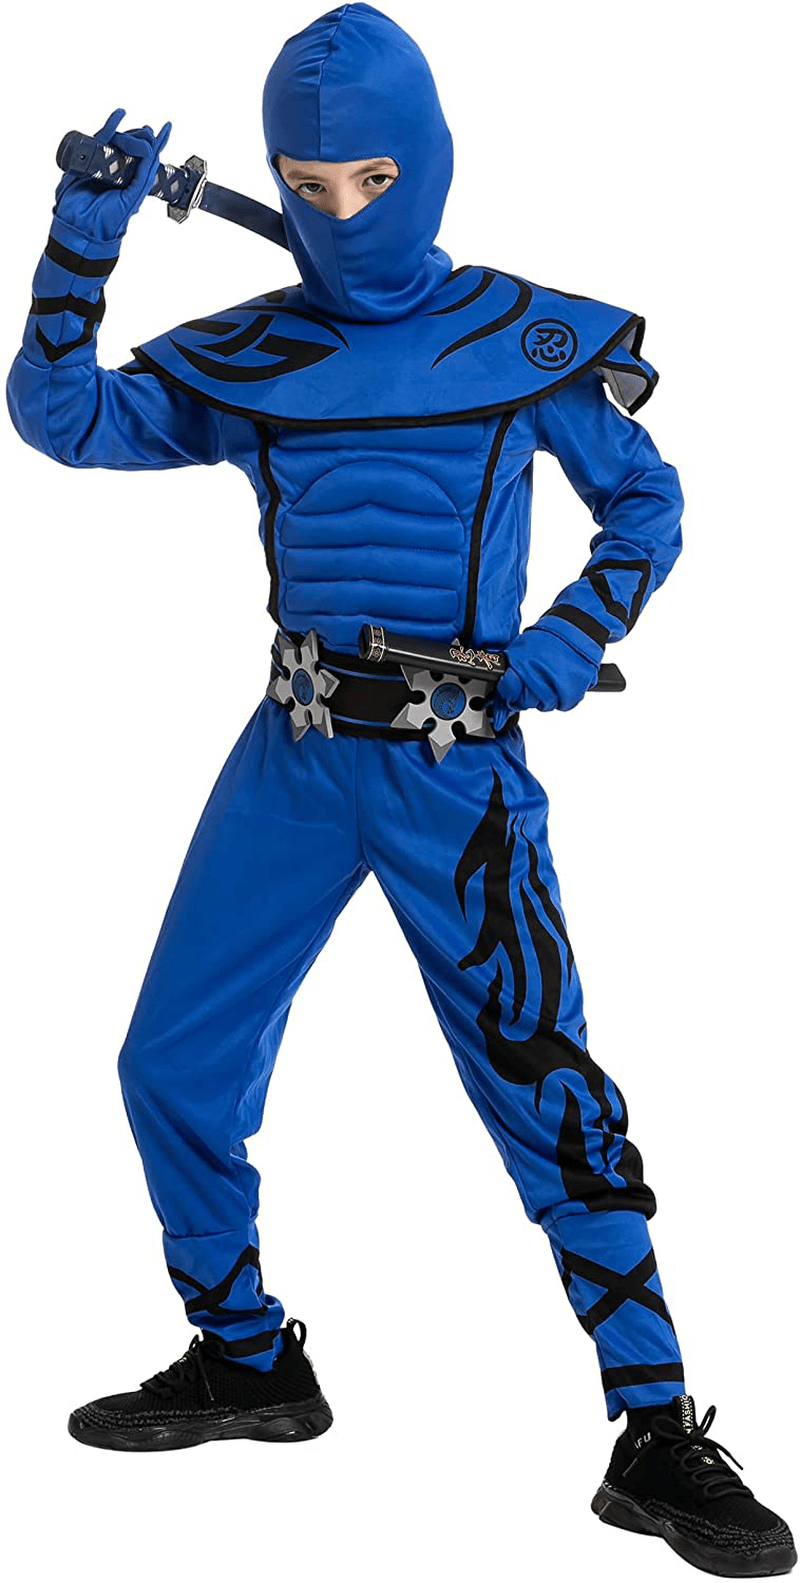 Blue Kungfu Ninja Costume for Boys and Girls, Halloween Dress Up Party, Ninja Role Playing, Themed Parties, Everyday Play